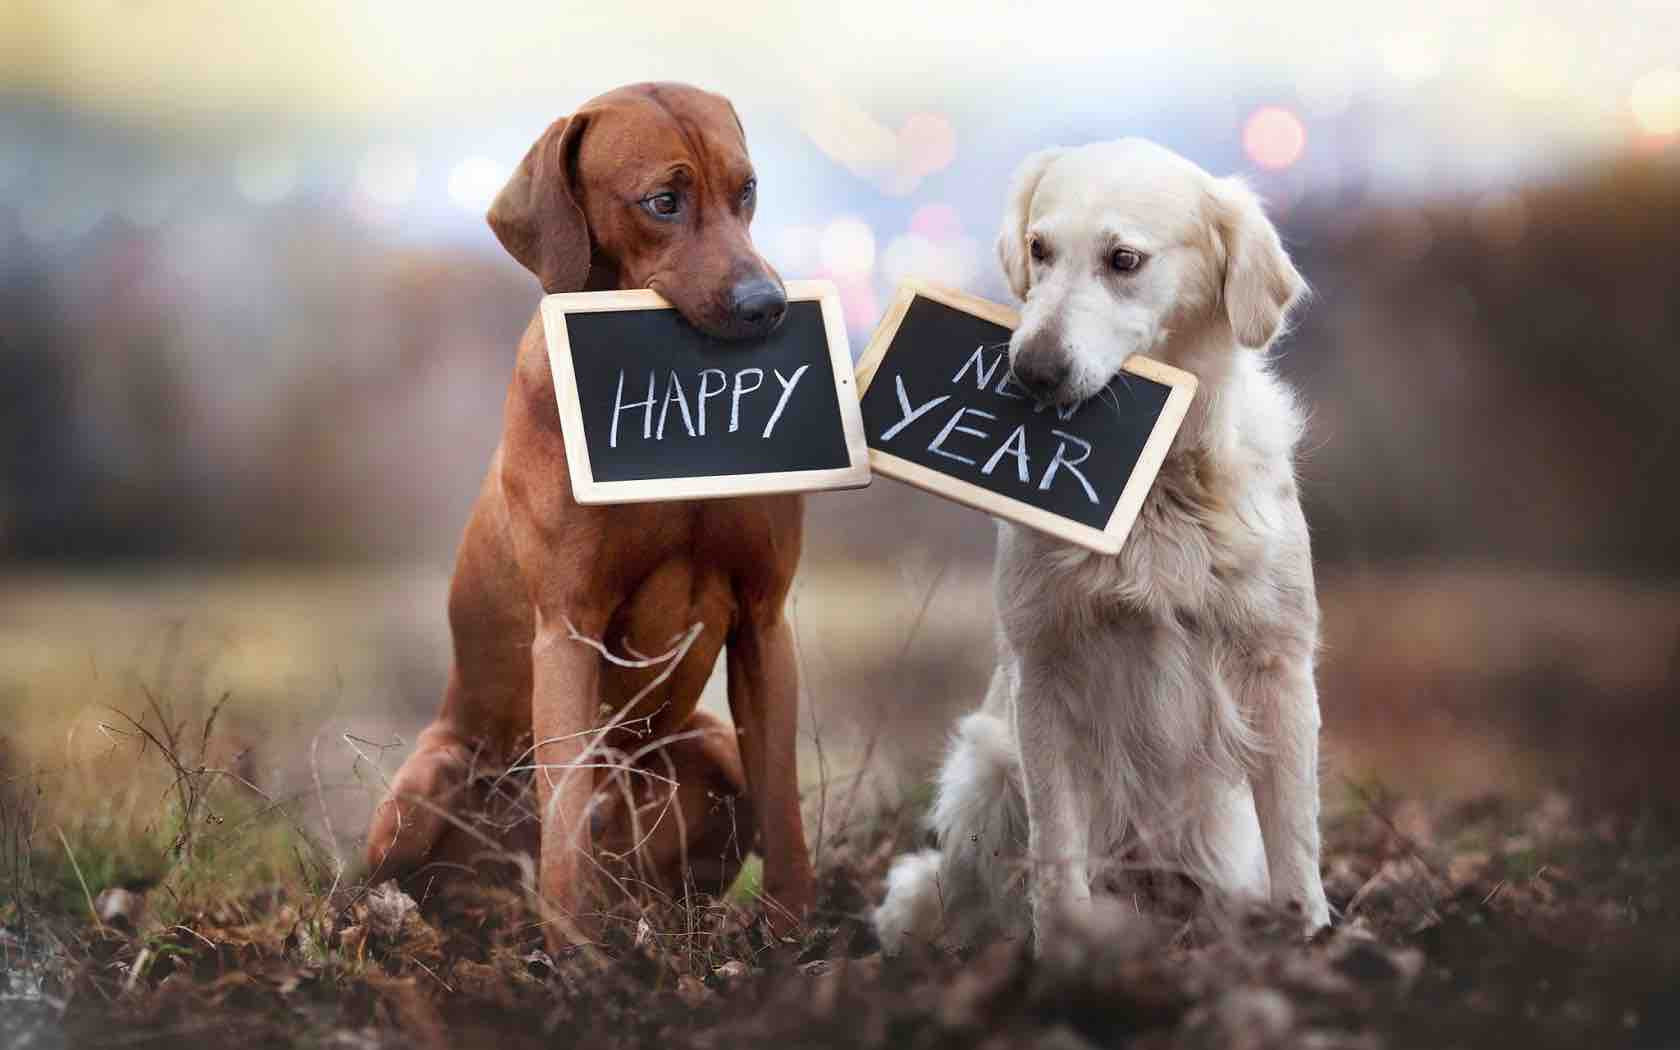 https://sitmeanssit.com/dog-training-mu/cleveland-akron-dog-training/files/2023/01/happy-new-year-cute-dogs-1680x1050-wide-wallpapers.net_1680x.jpg